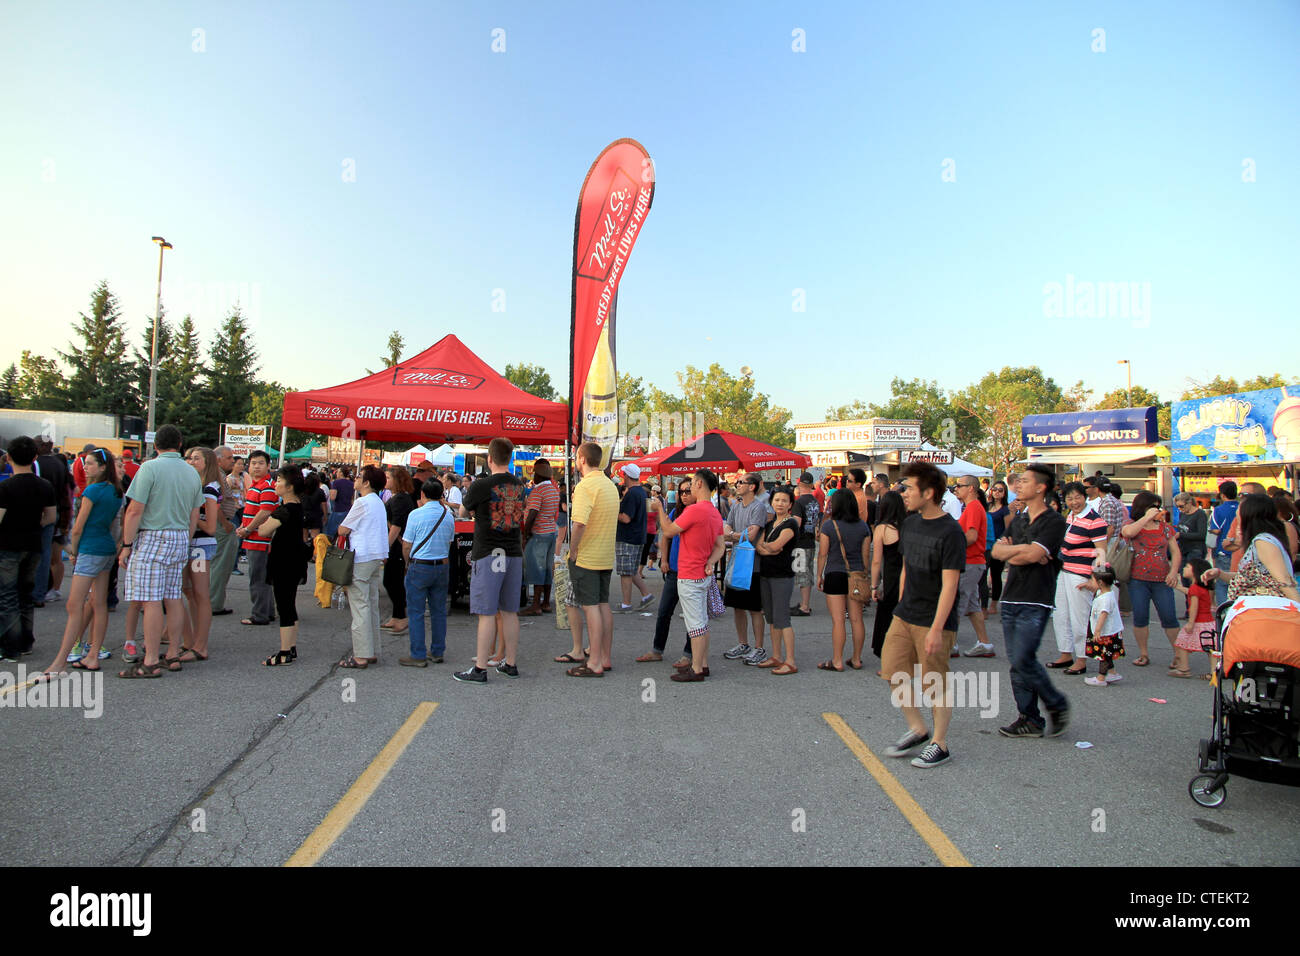 People lining up at an outdoor festival in Toronto Stock Photo